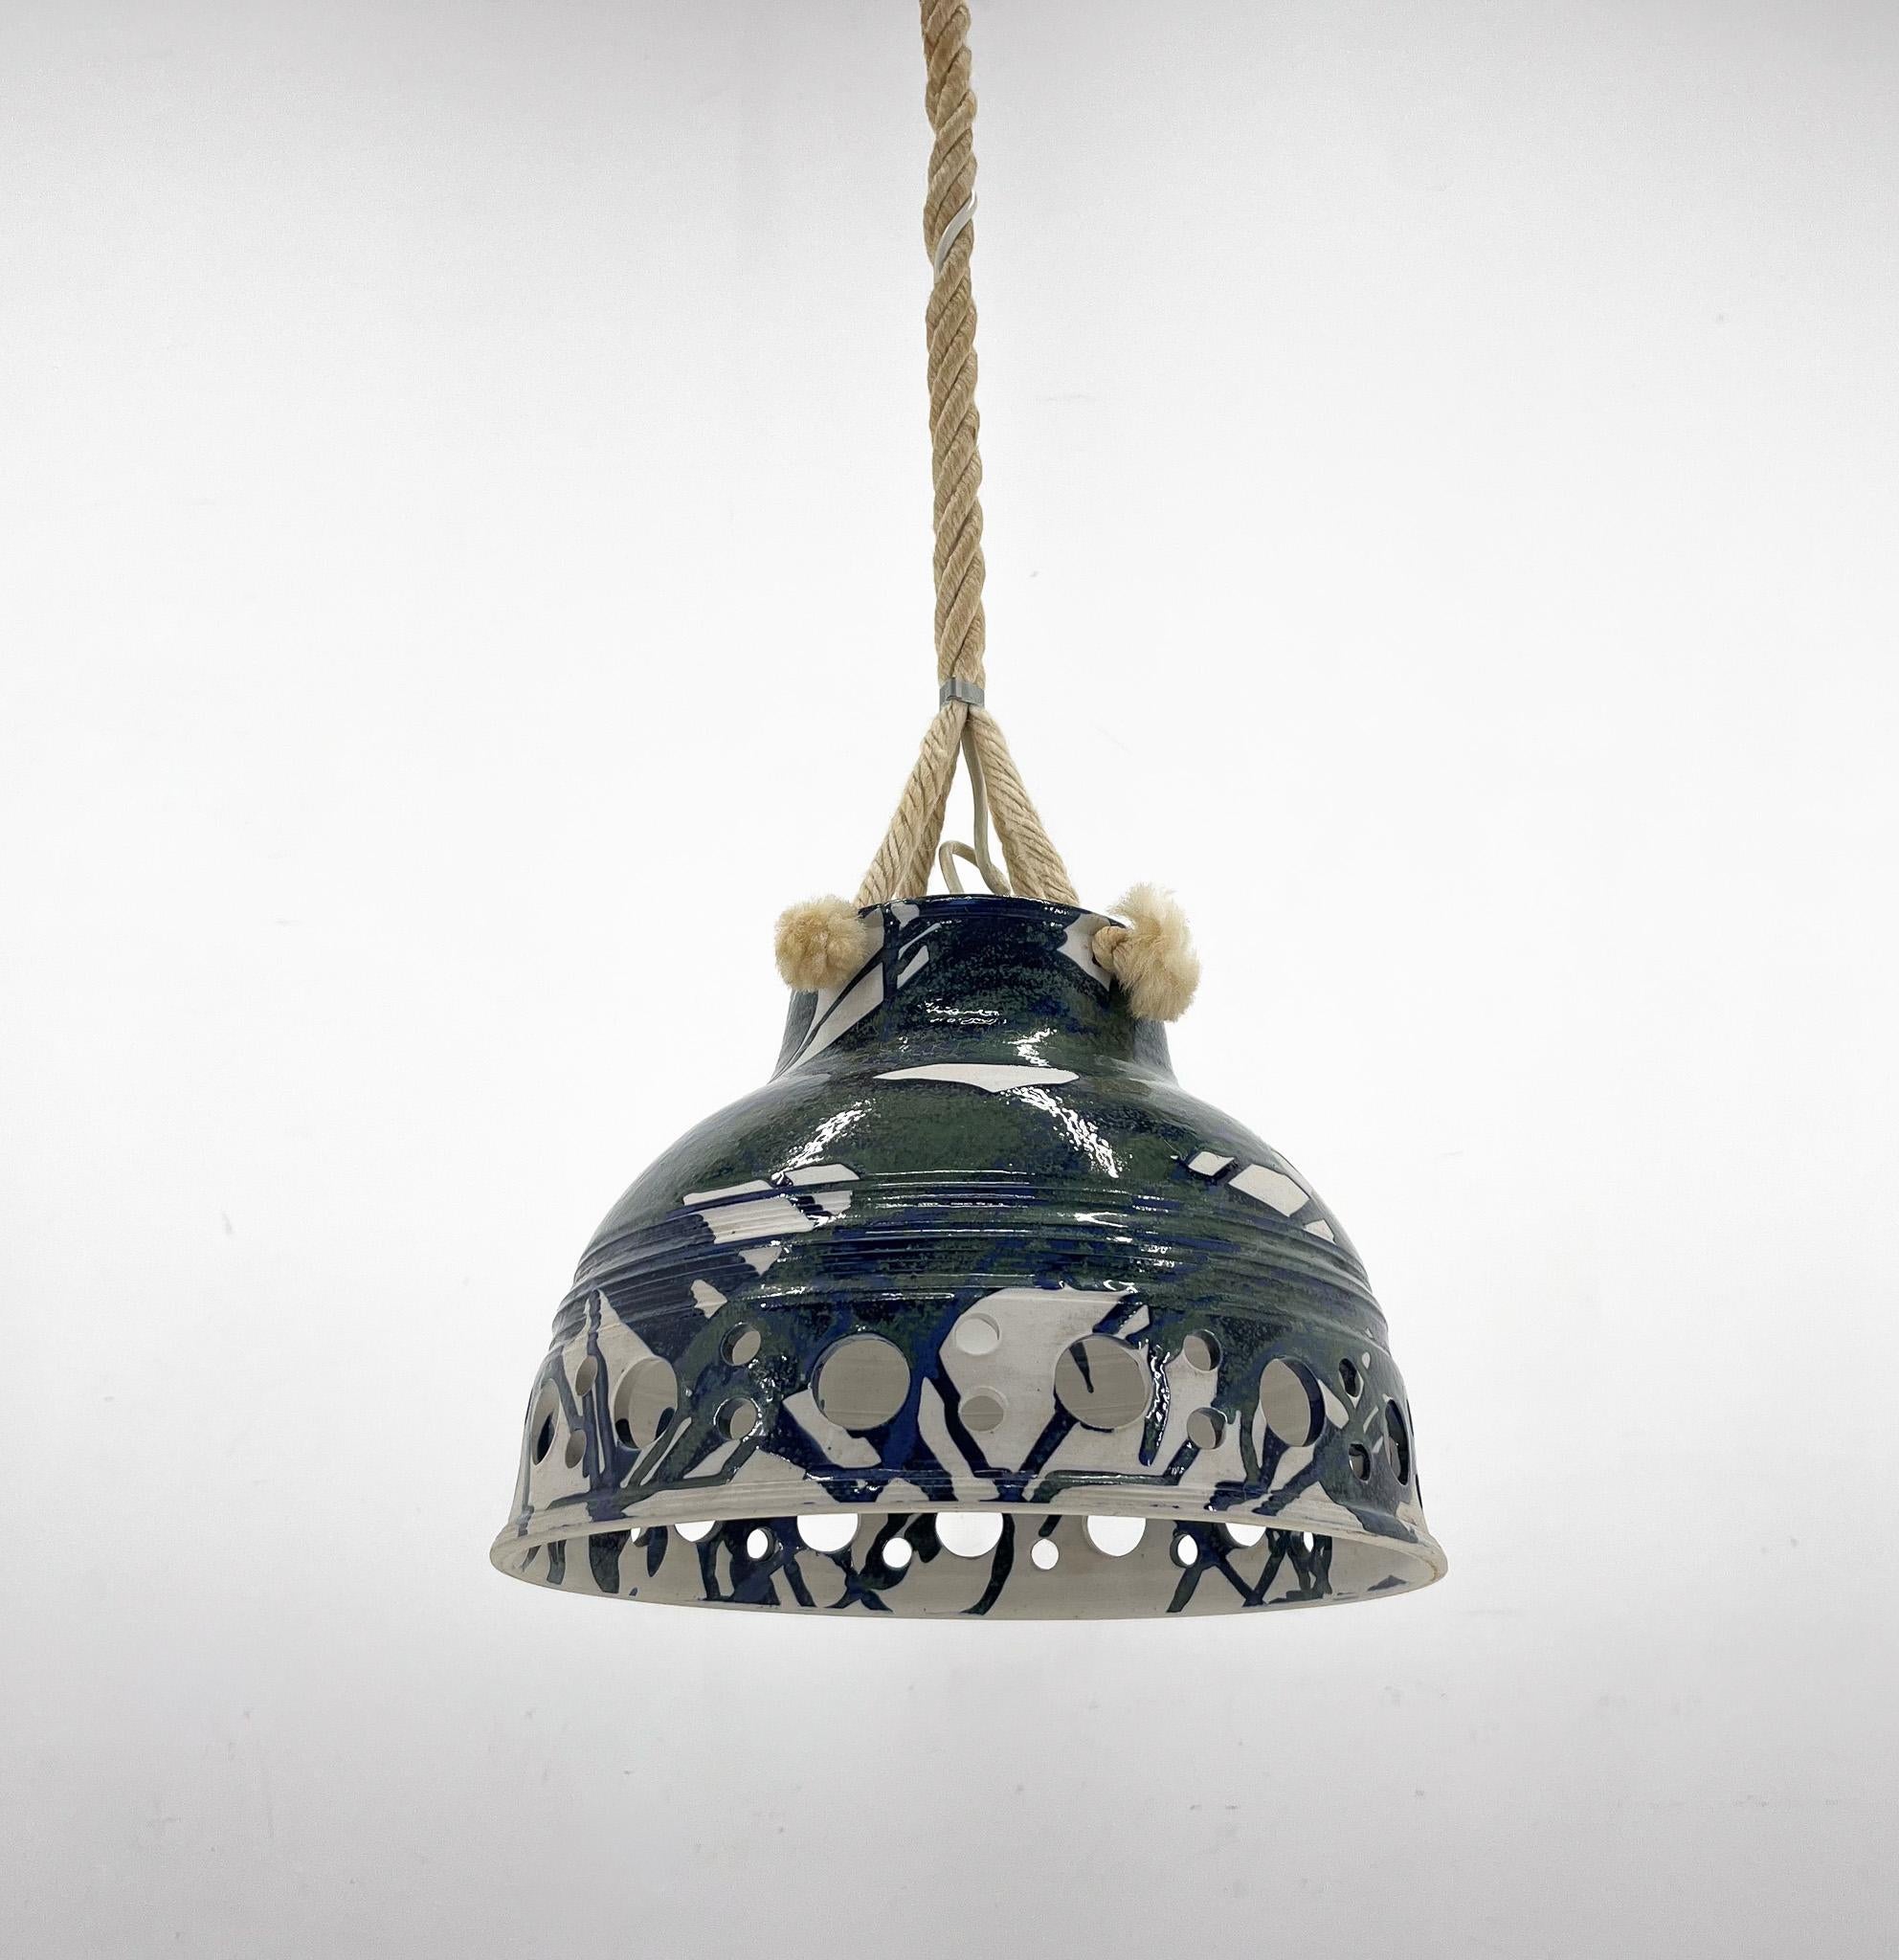 Long and heavy ceramic pendant light suspended on a rope. Manufactured in Denmark in the 1970's. Can be shortened upon request. Bulbs: 1 x E26-E27. US wiring compatible.